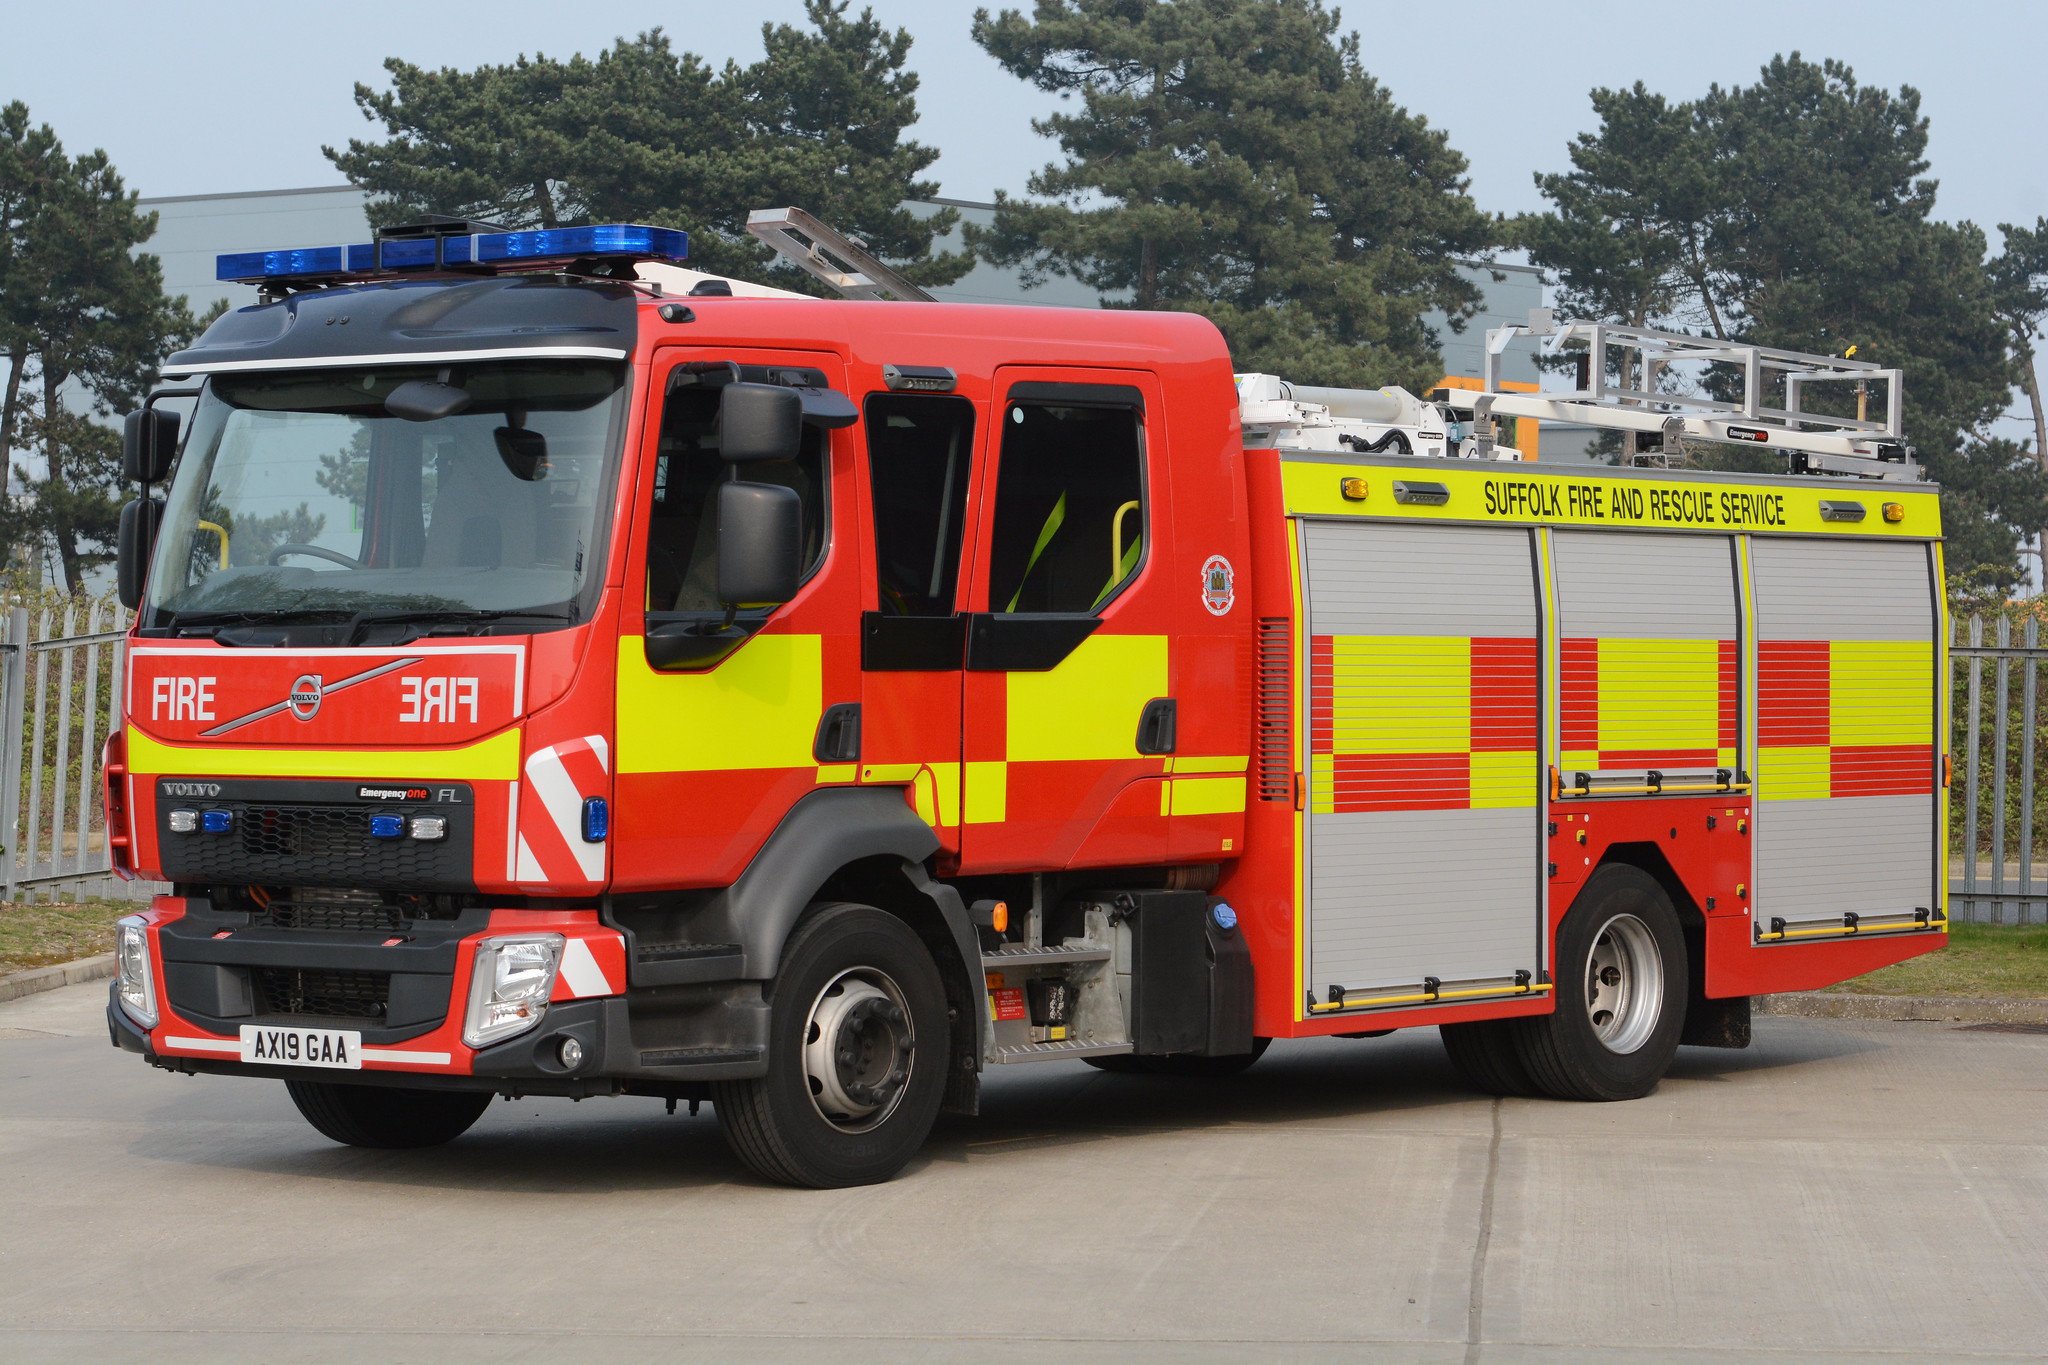 Suffolk Fire and Rescue Service rated “Good” in Government inspection ...